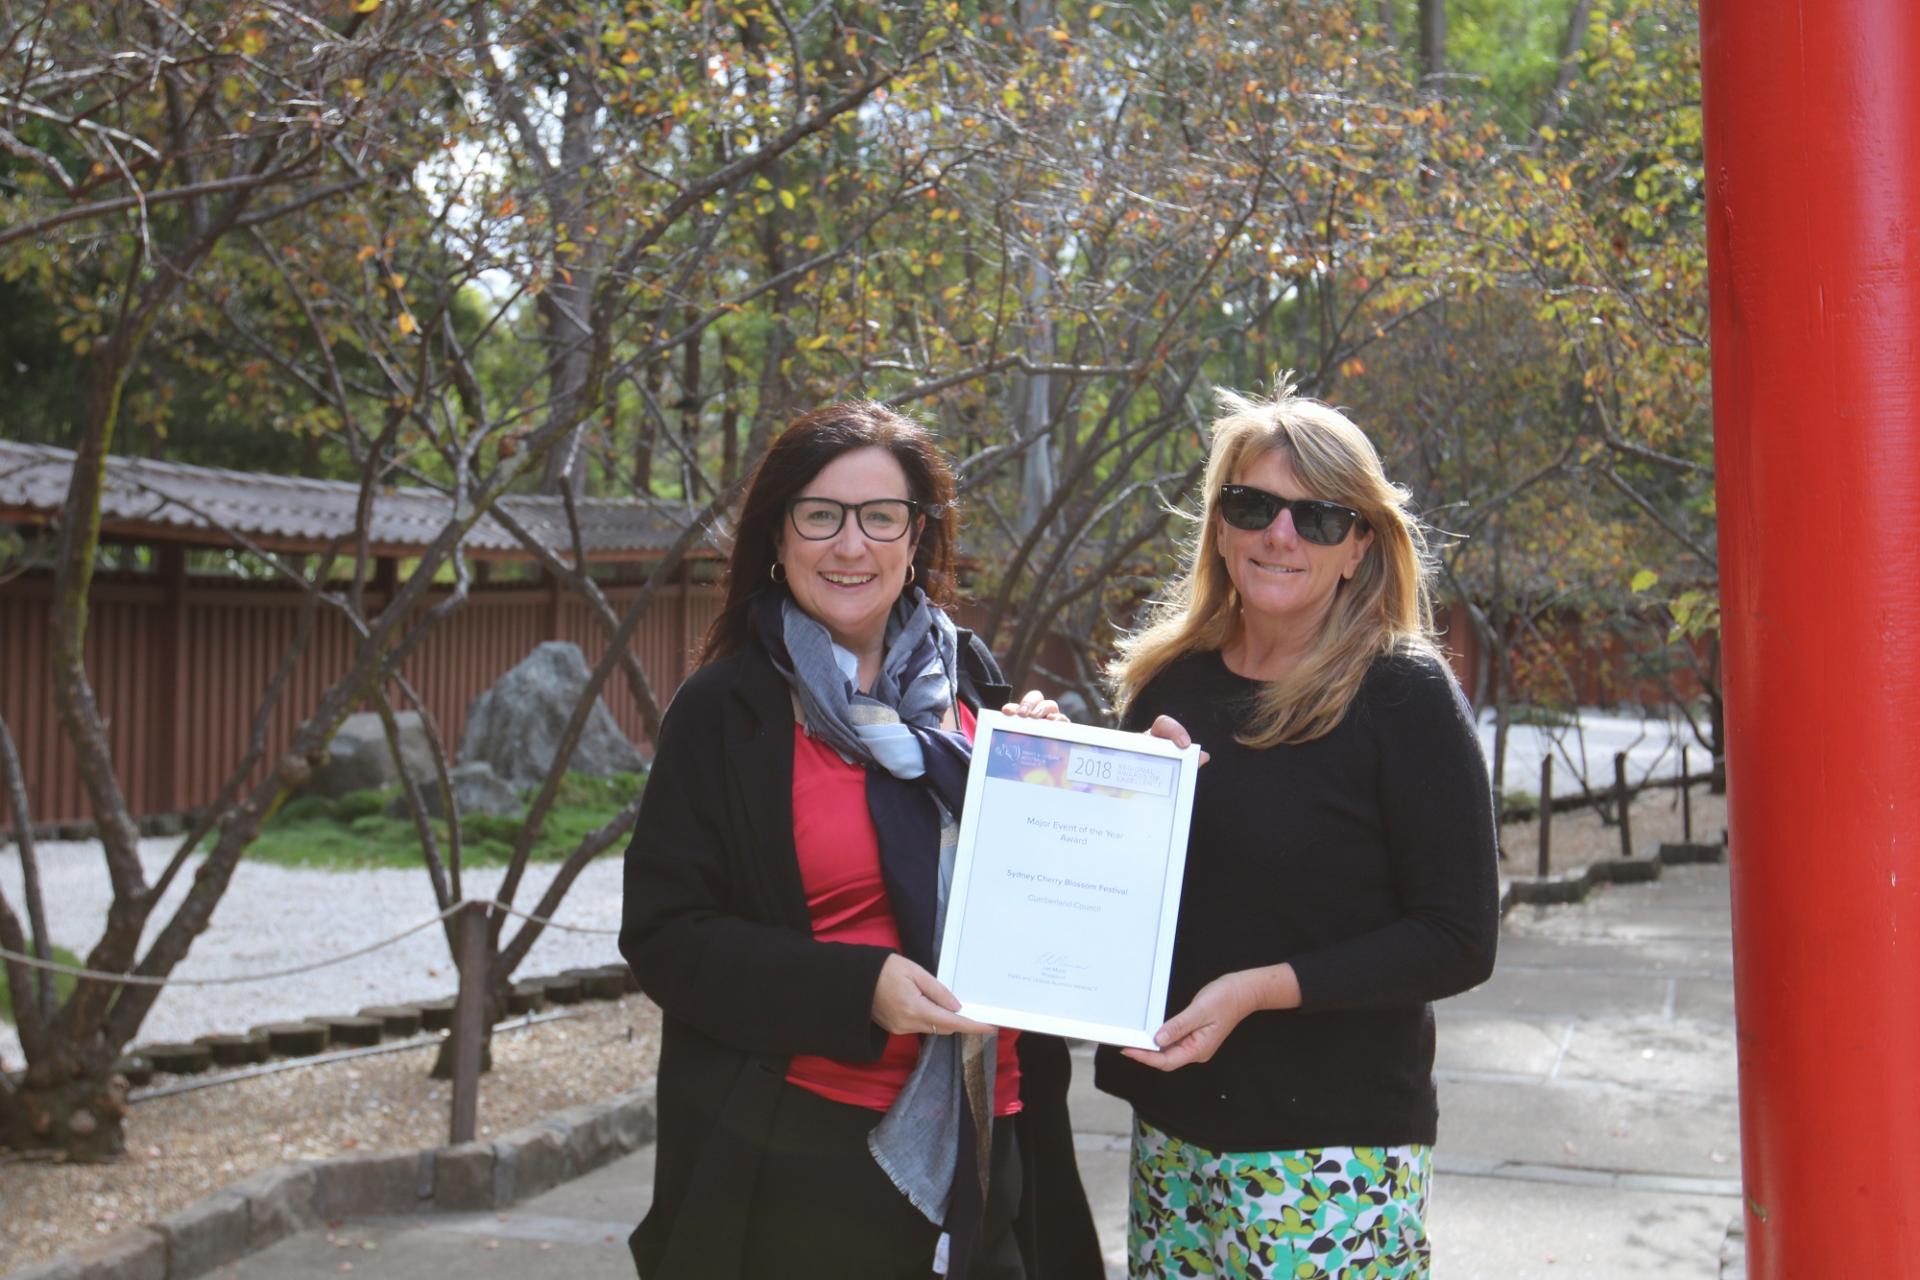 two women holding a certificate together with gardens in the background